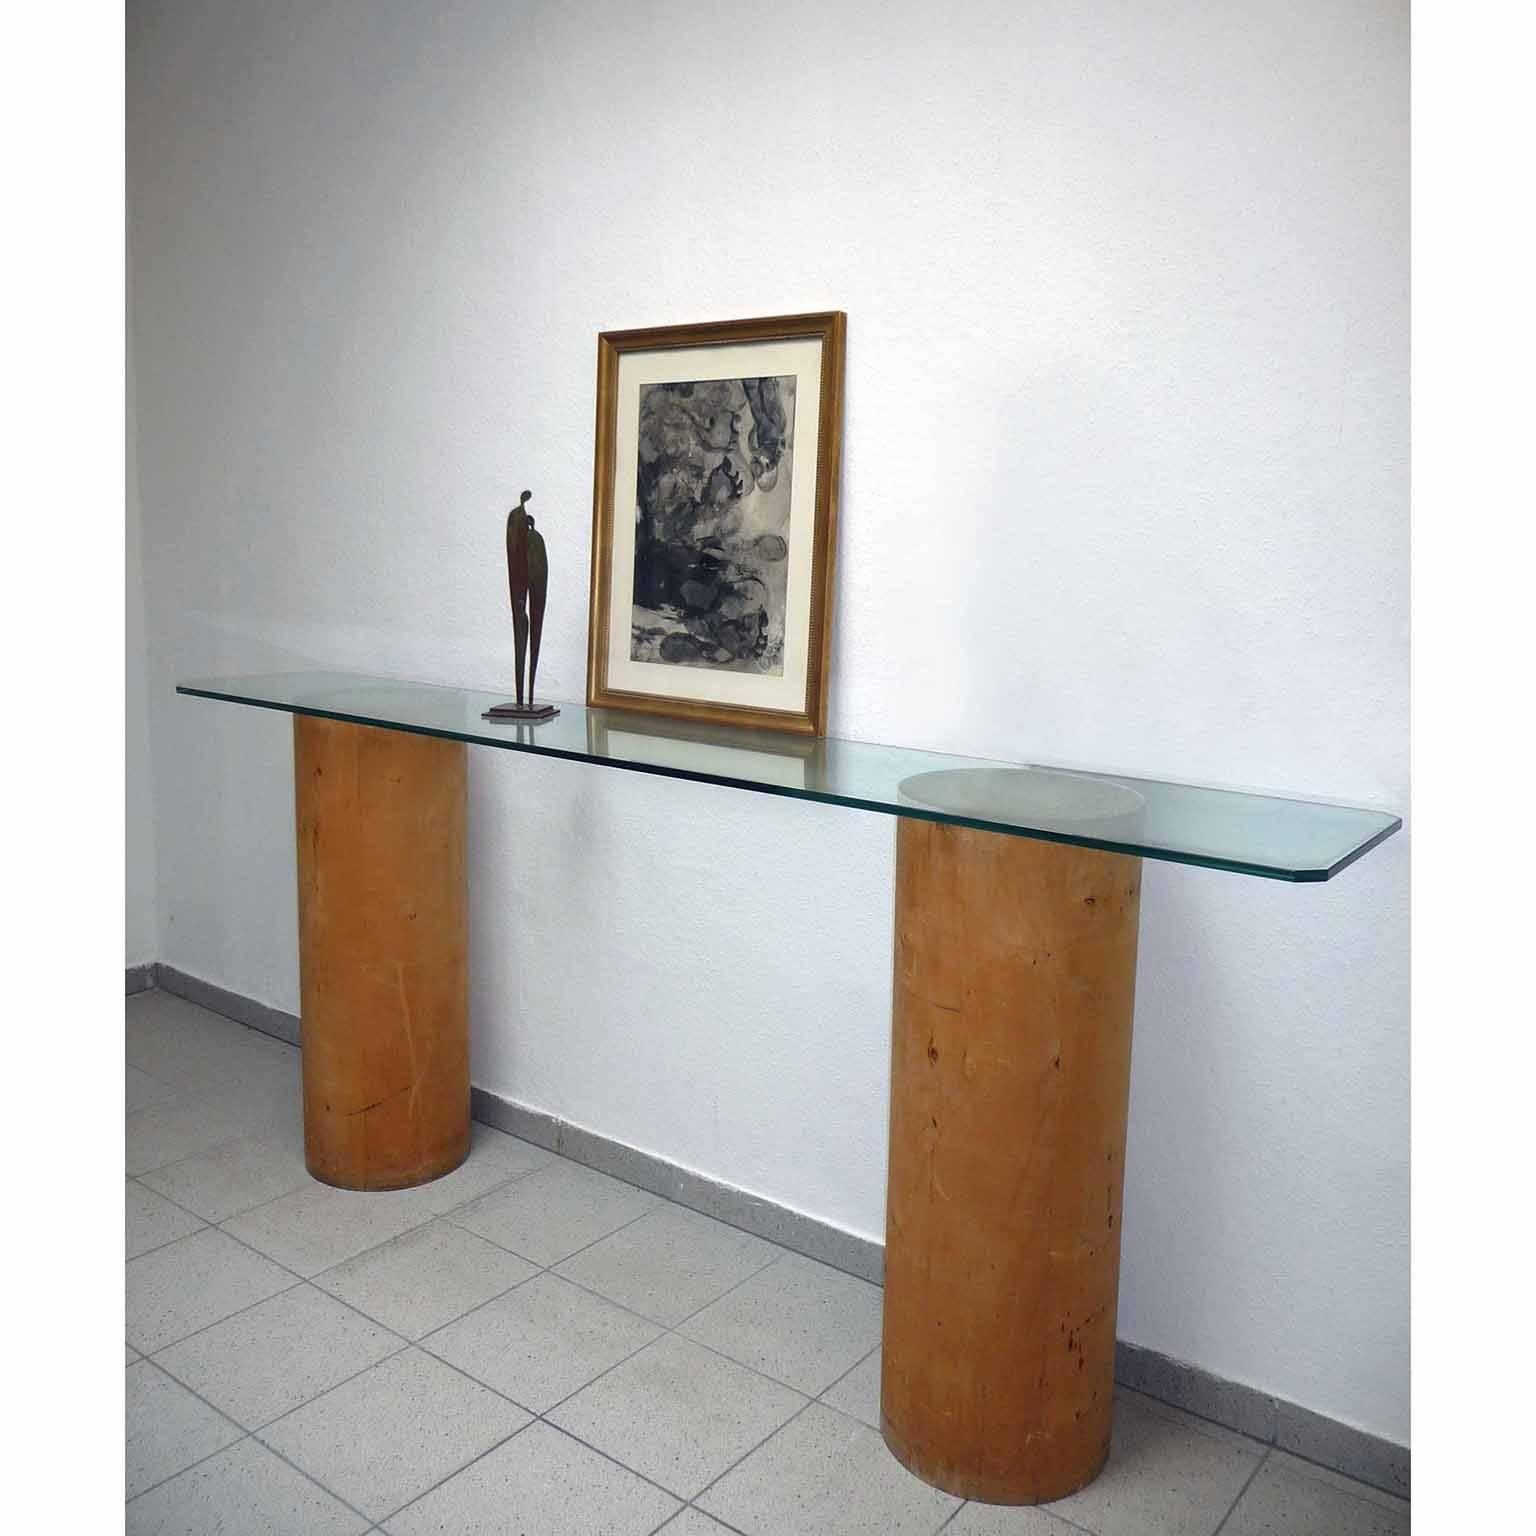 Pierre Donna, (1965.)
Three people.

Patinated metal, France, circa 2001. Signed on the terrace. Authenticity certificate included.
Measures: Height 42 cm (16.53 in.).